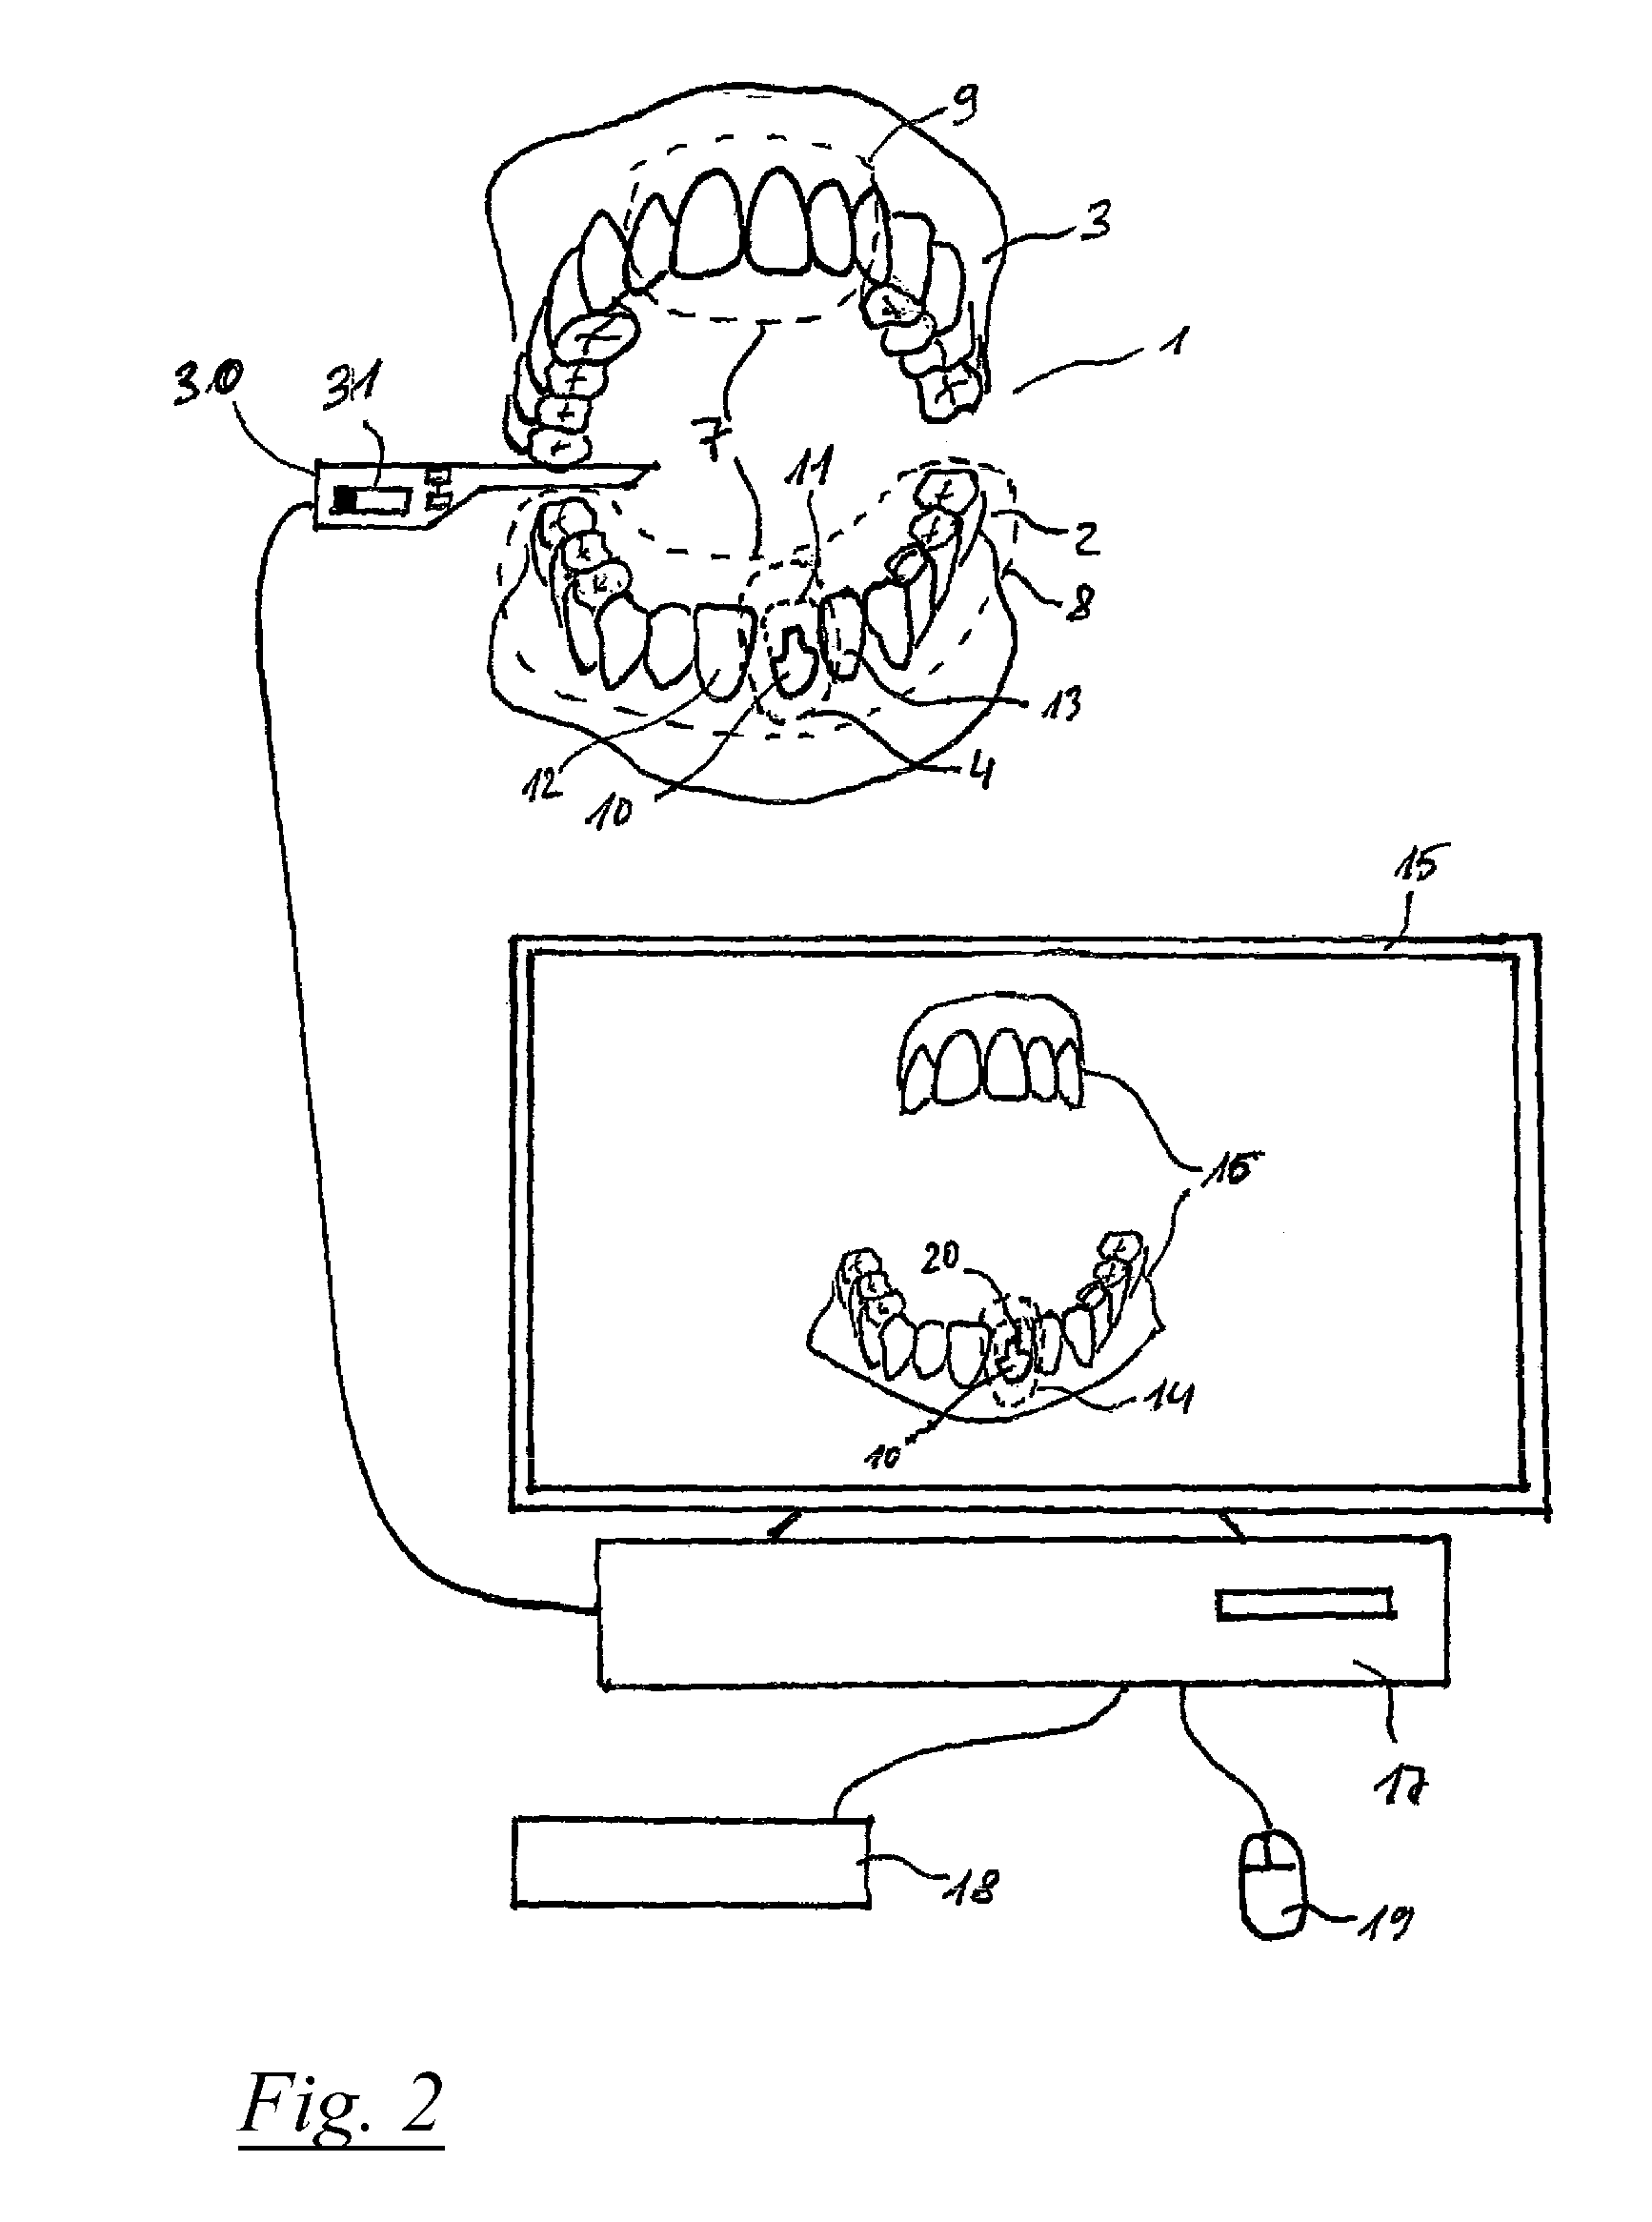 Method for the optical three-dimensional measurement of a dental object